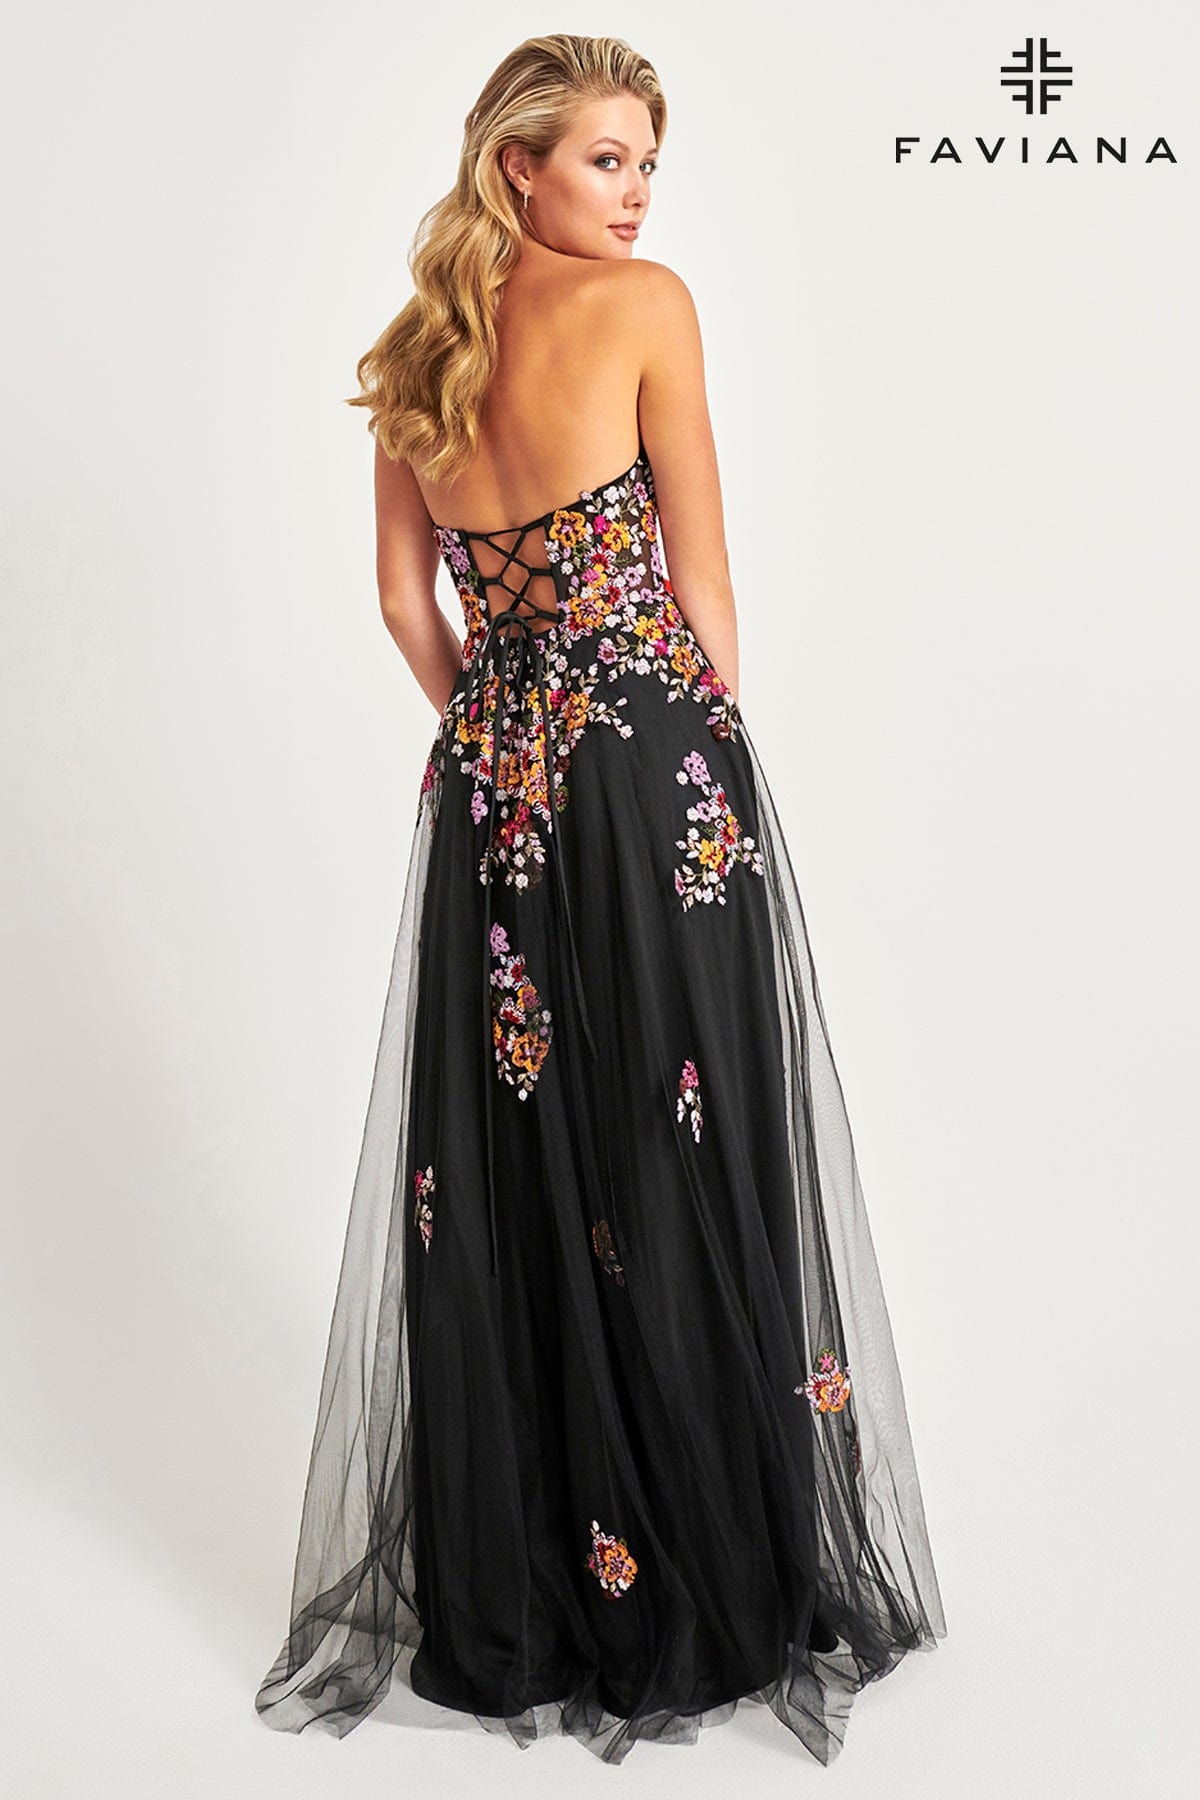 Sunburst Strapless Corset Dress With Flowy Tulle Skirt And Floral Applique | 11028